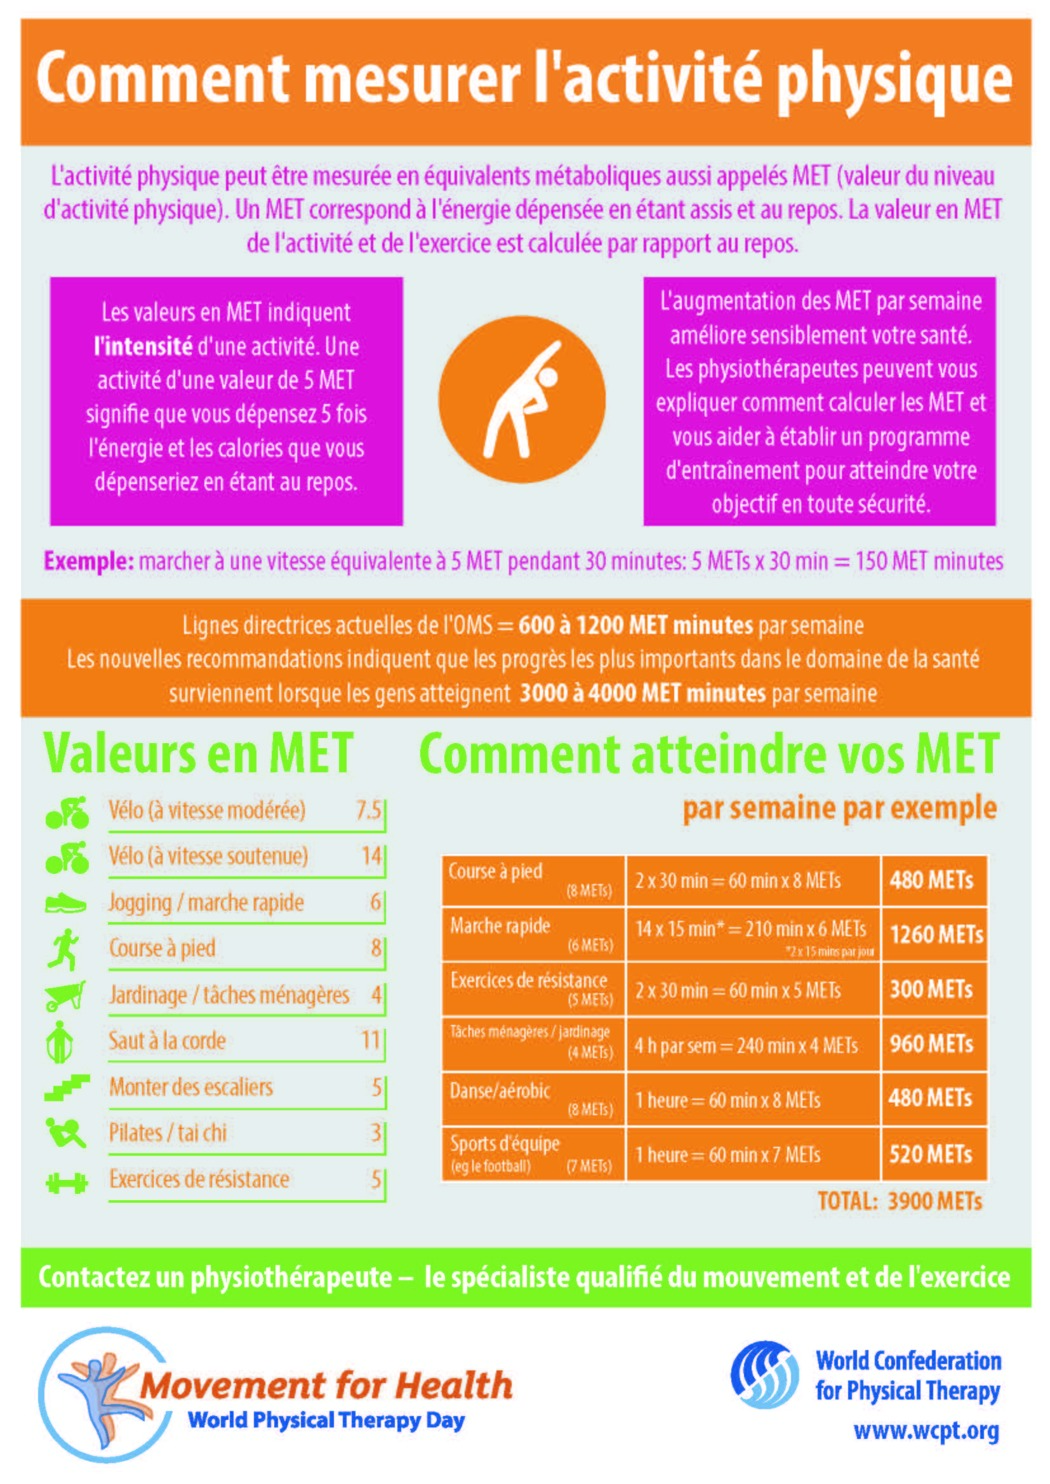 MeasuringPhysicalActivity_infographic_A4_FINAL_French.jpg